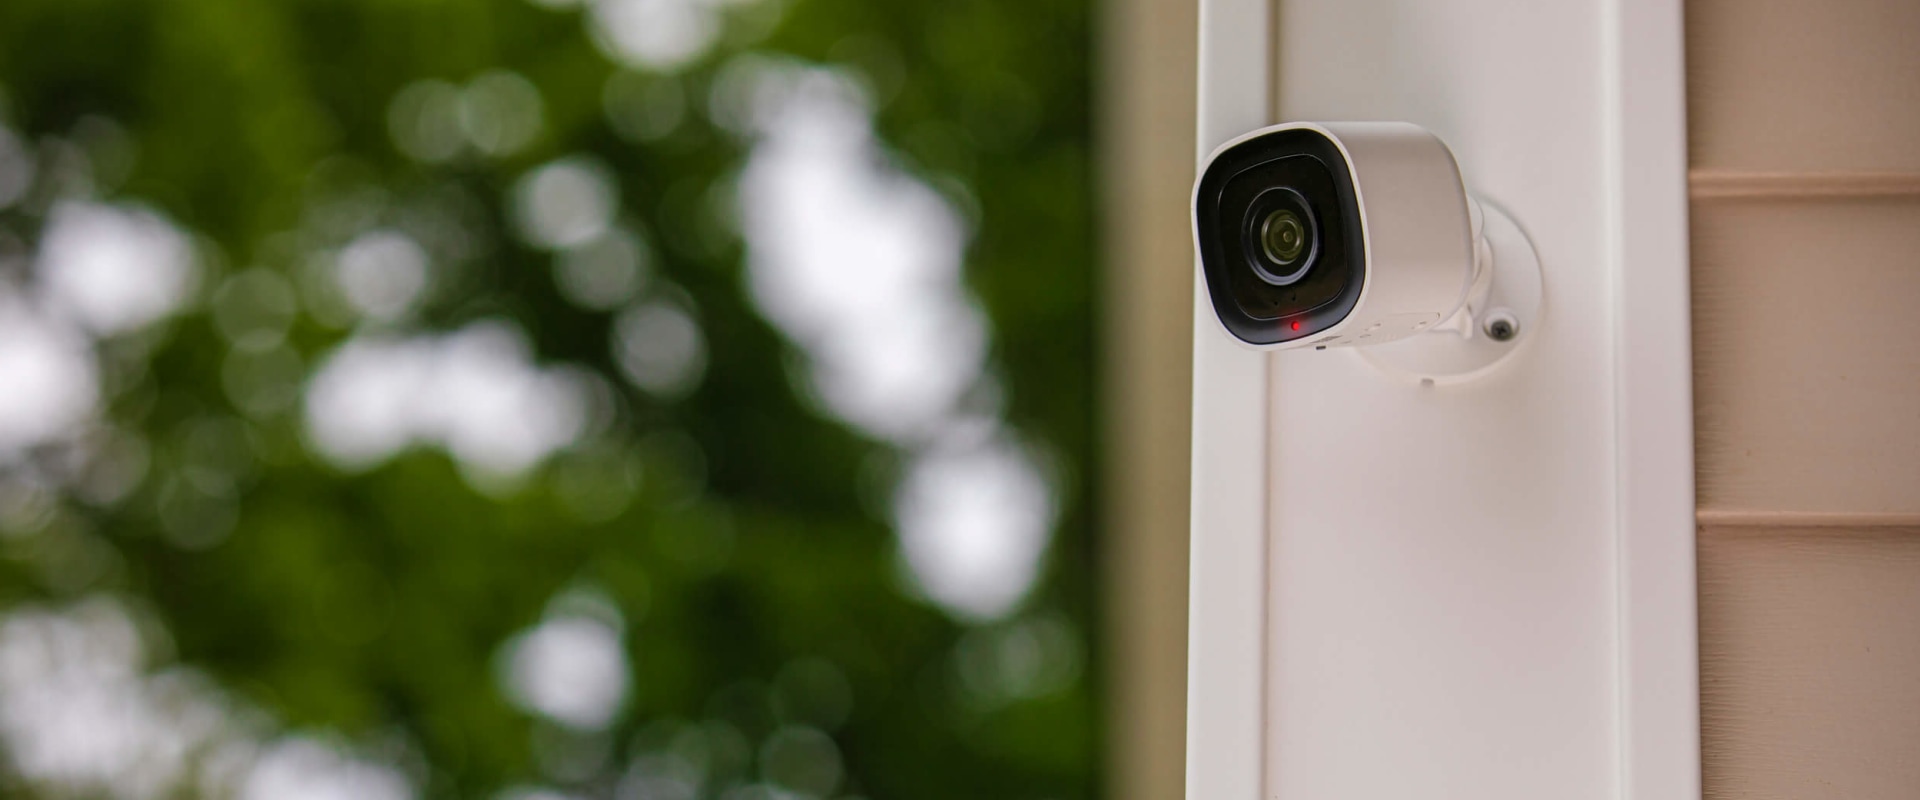 Security Cameras: Everything You Need to Know